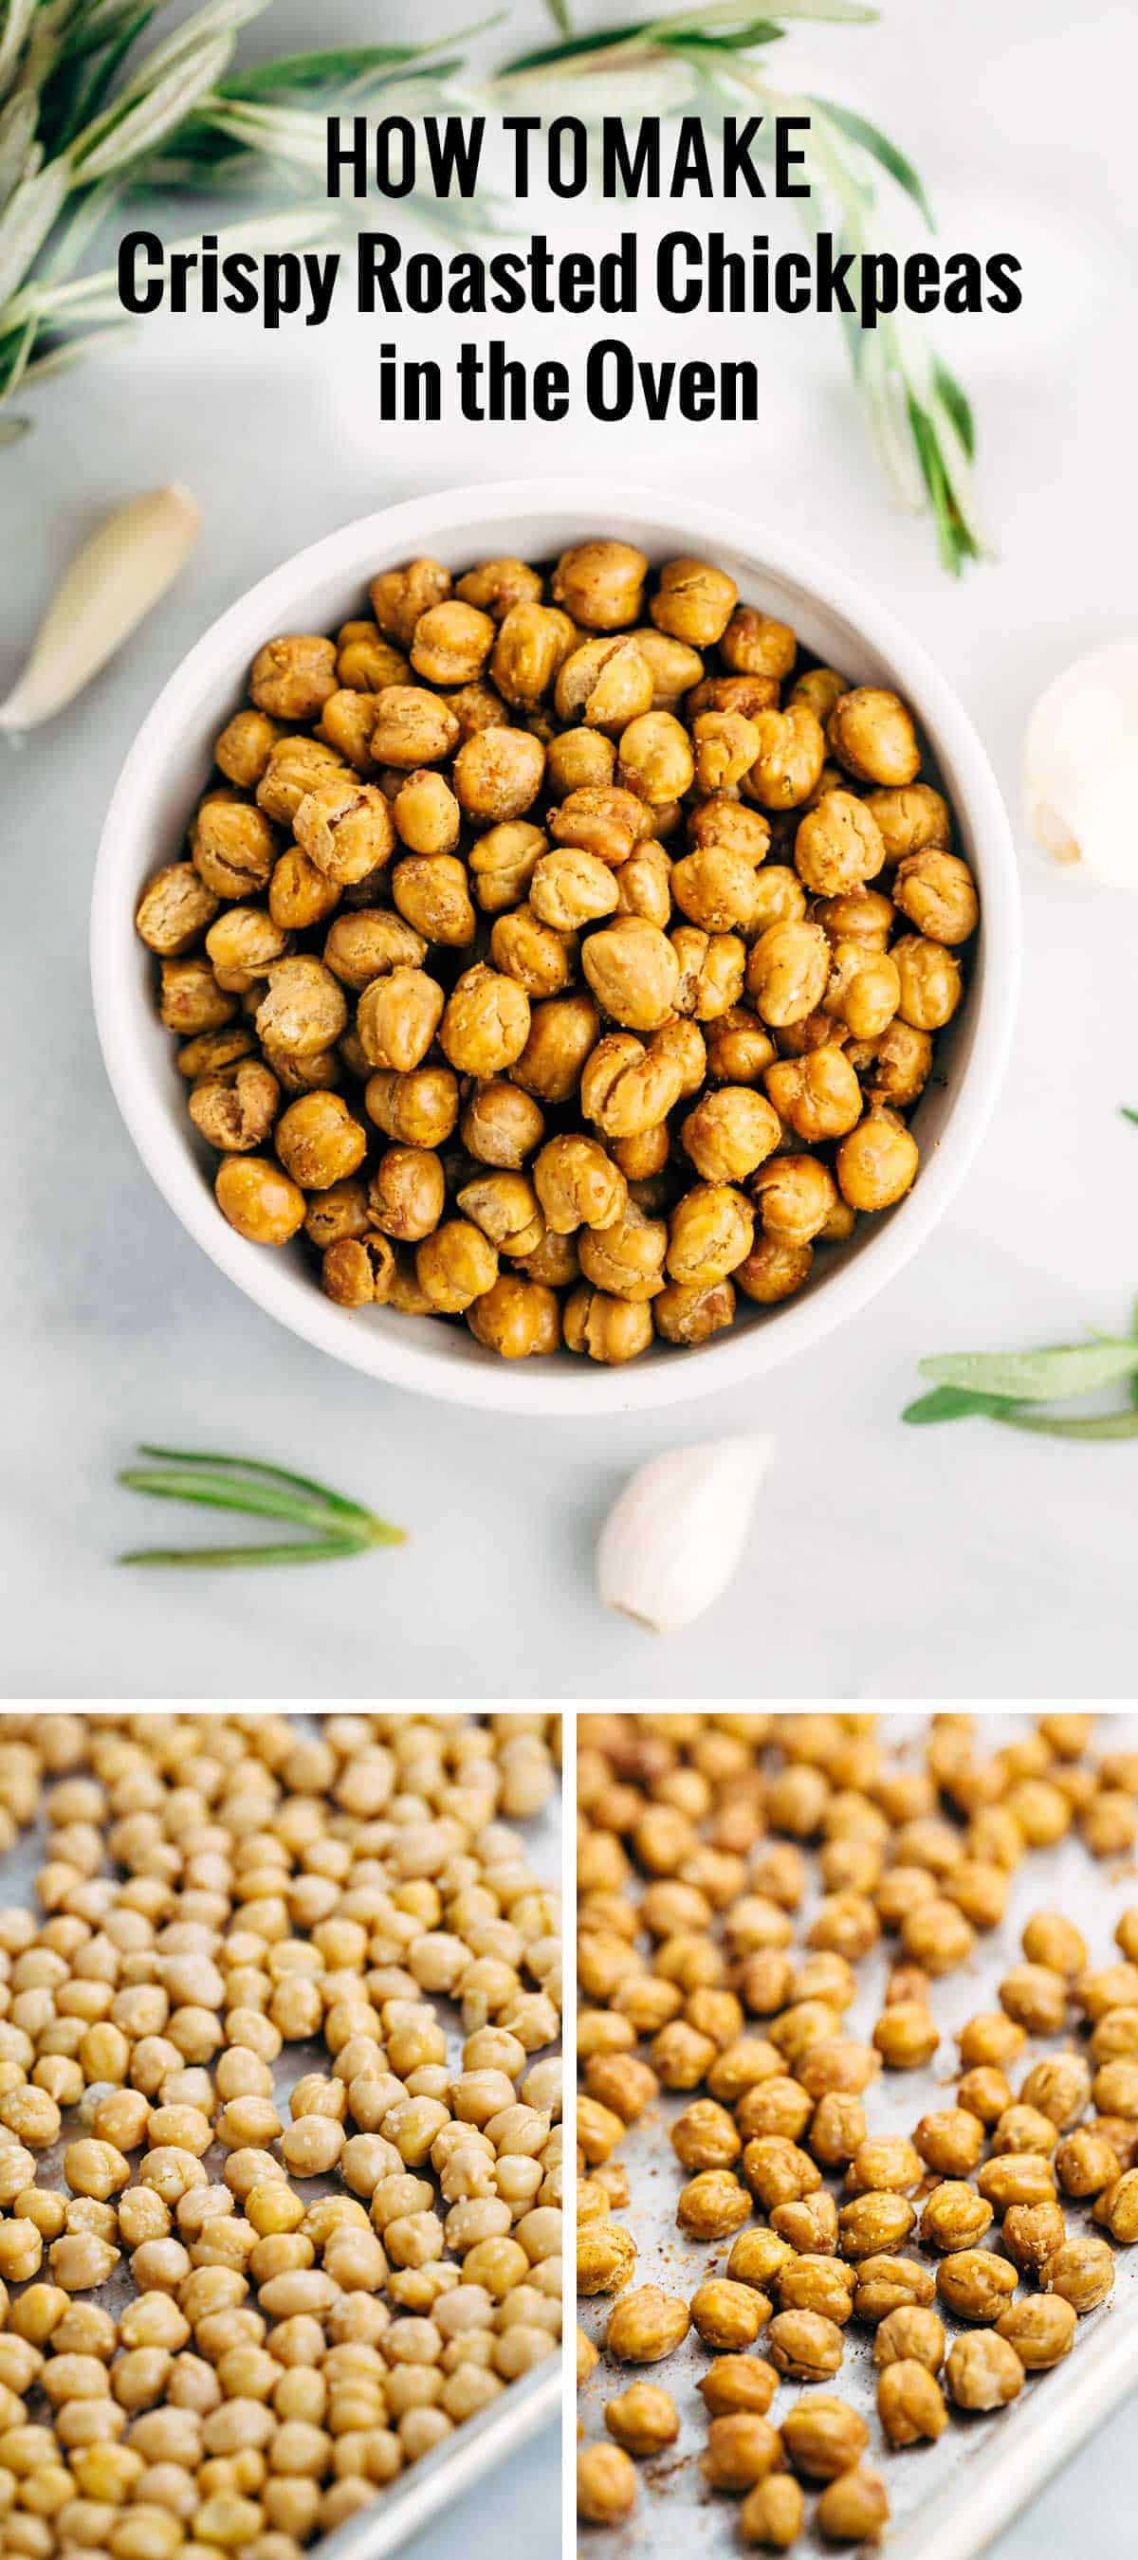 Chickpea Snacks Recipes
 How To Make Crispy Roasted Chickpeas in the Oven